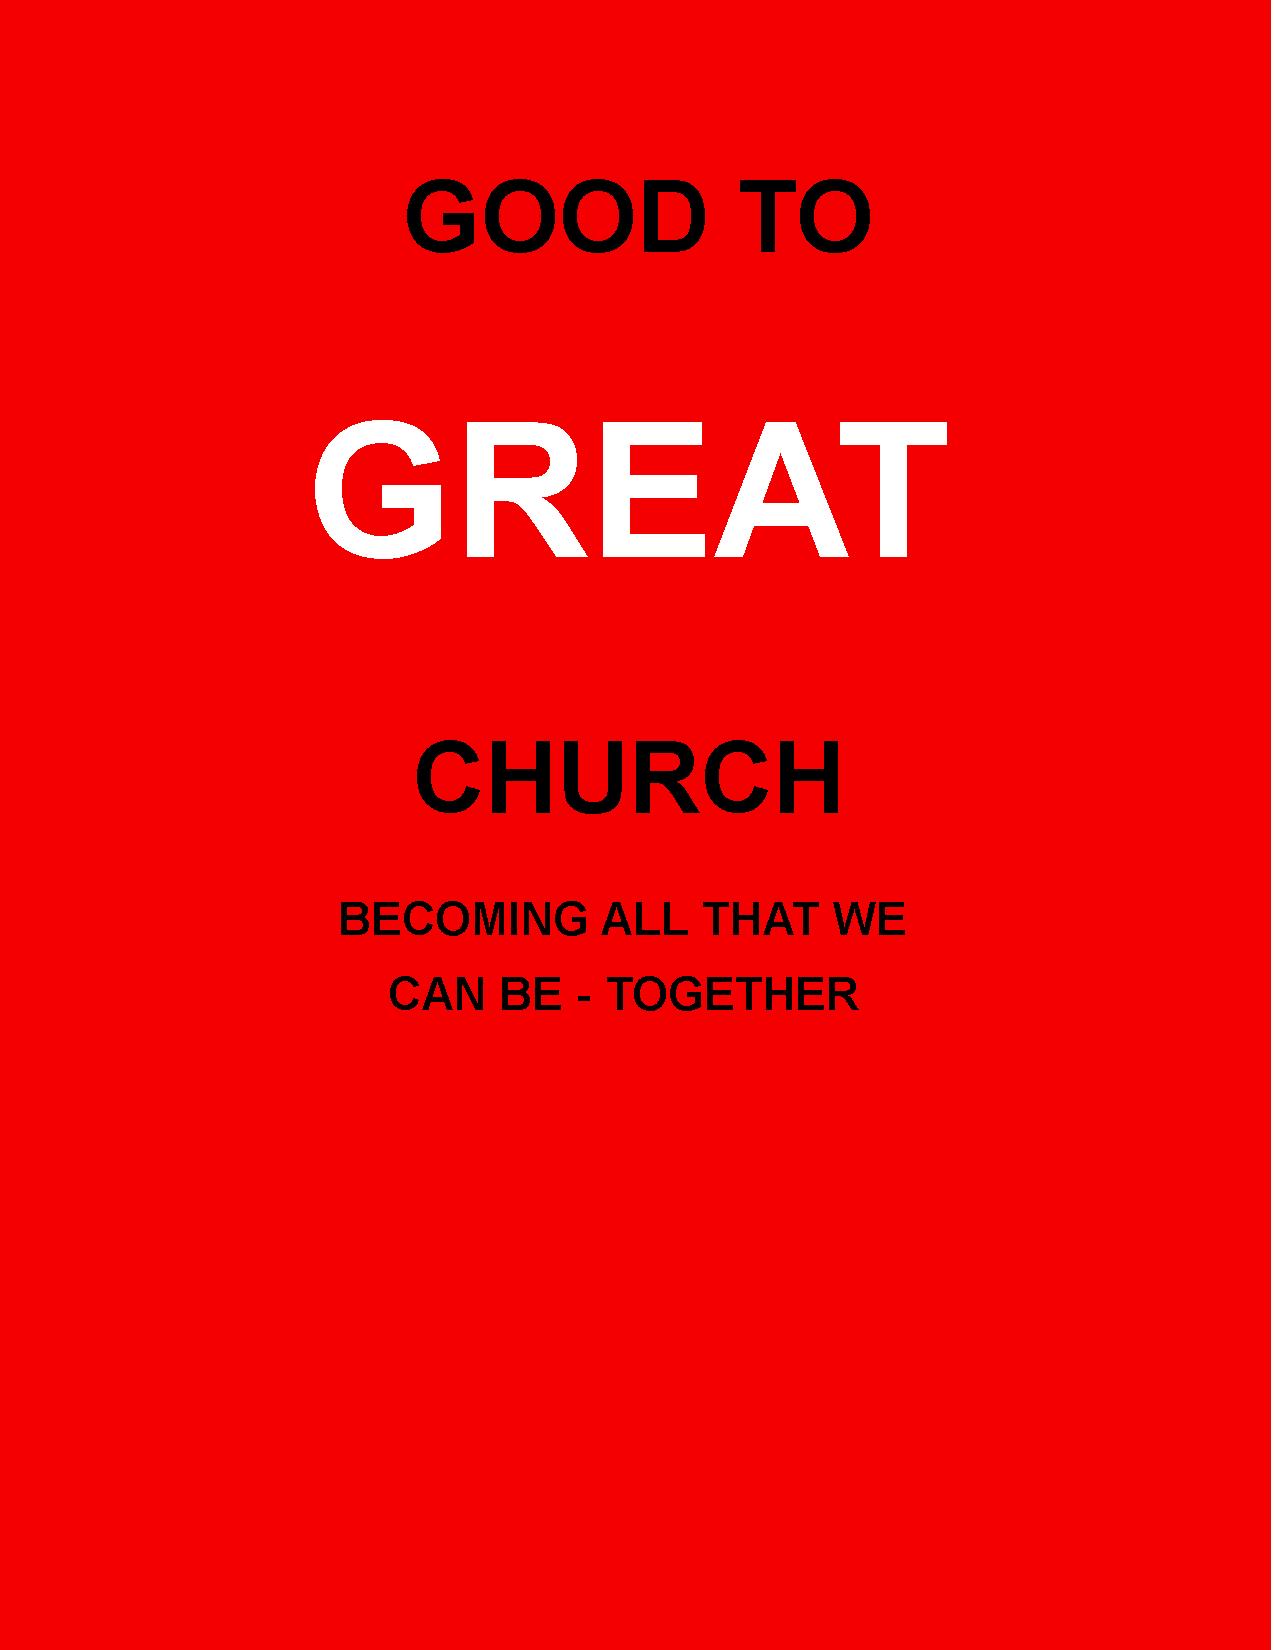 Becoming a Church of Great Teamwork